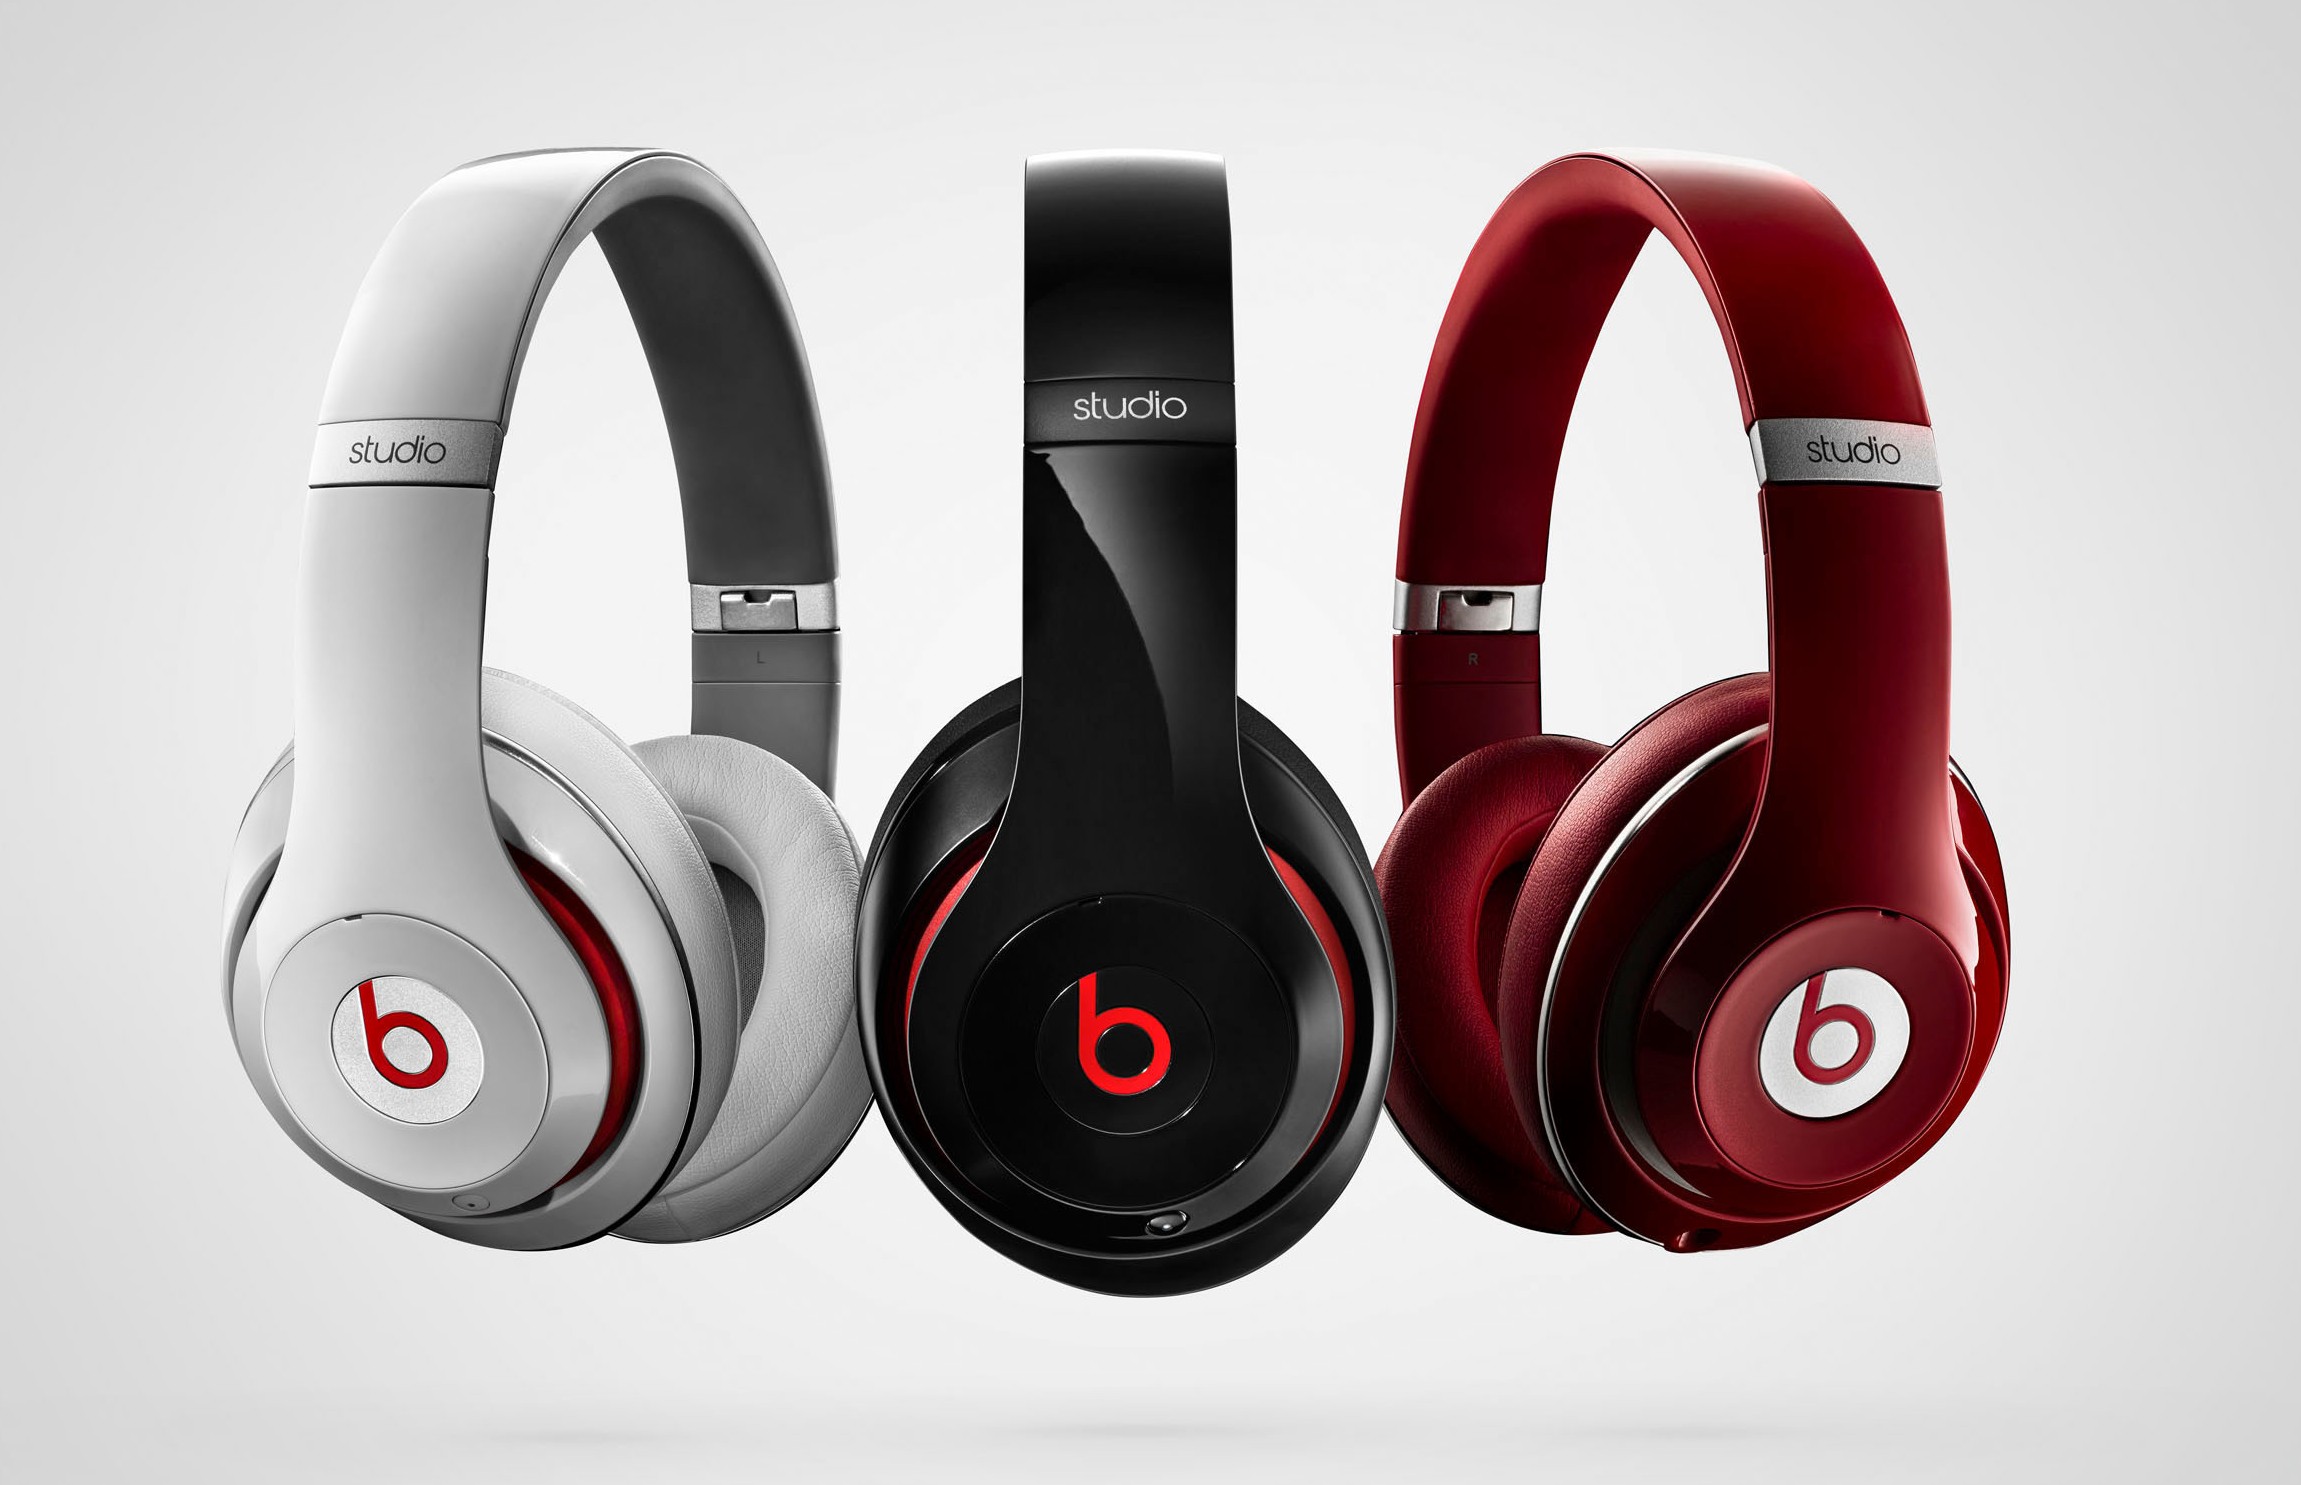 beats-by-dr-dre-introduces-the-new-beats-studio-headphones-redesigned-and-reimagined-prnewsfoto-beats-electronics-llc-e1374775803695.jpg